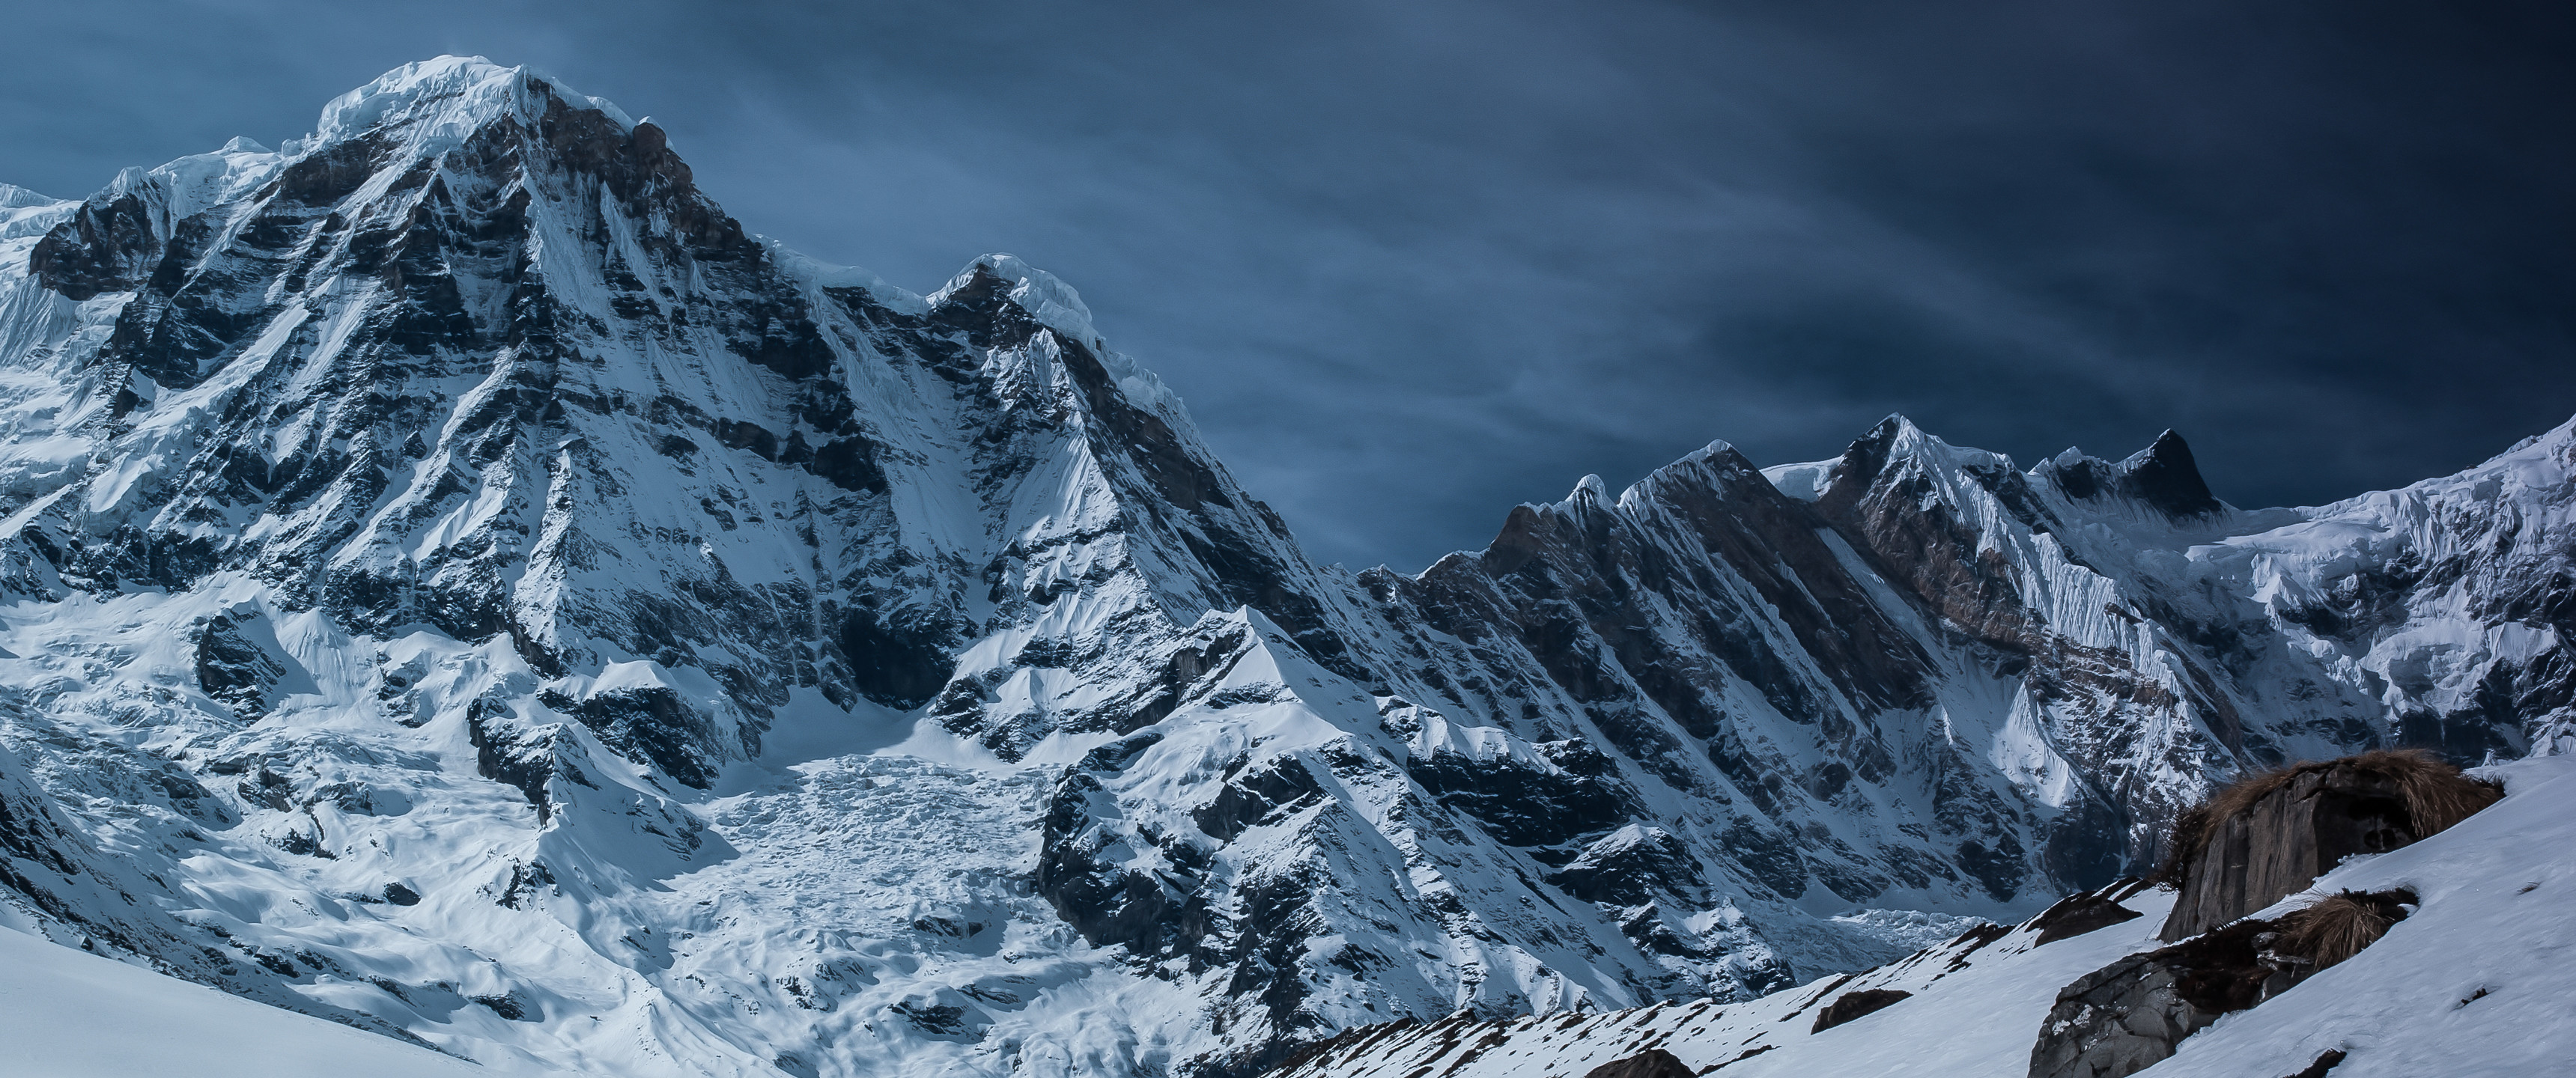 3440x1440   Snow Covered Mountains - 21:9 Ultrawide HD Wallpaper ( )